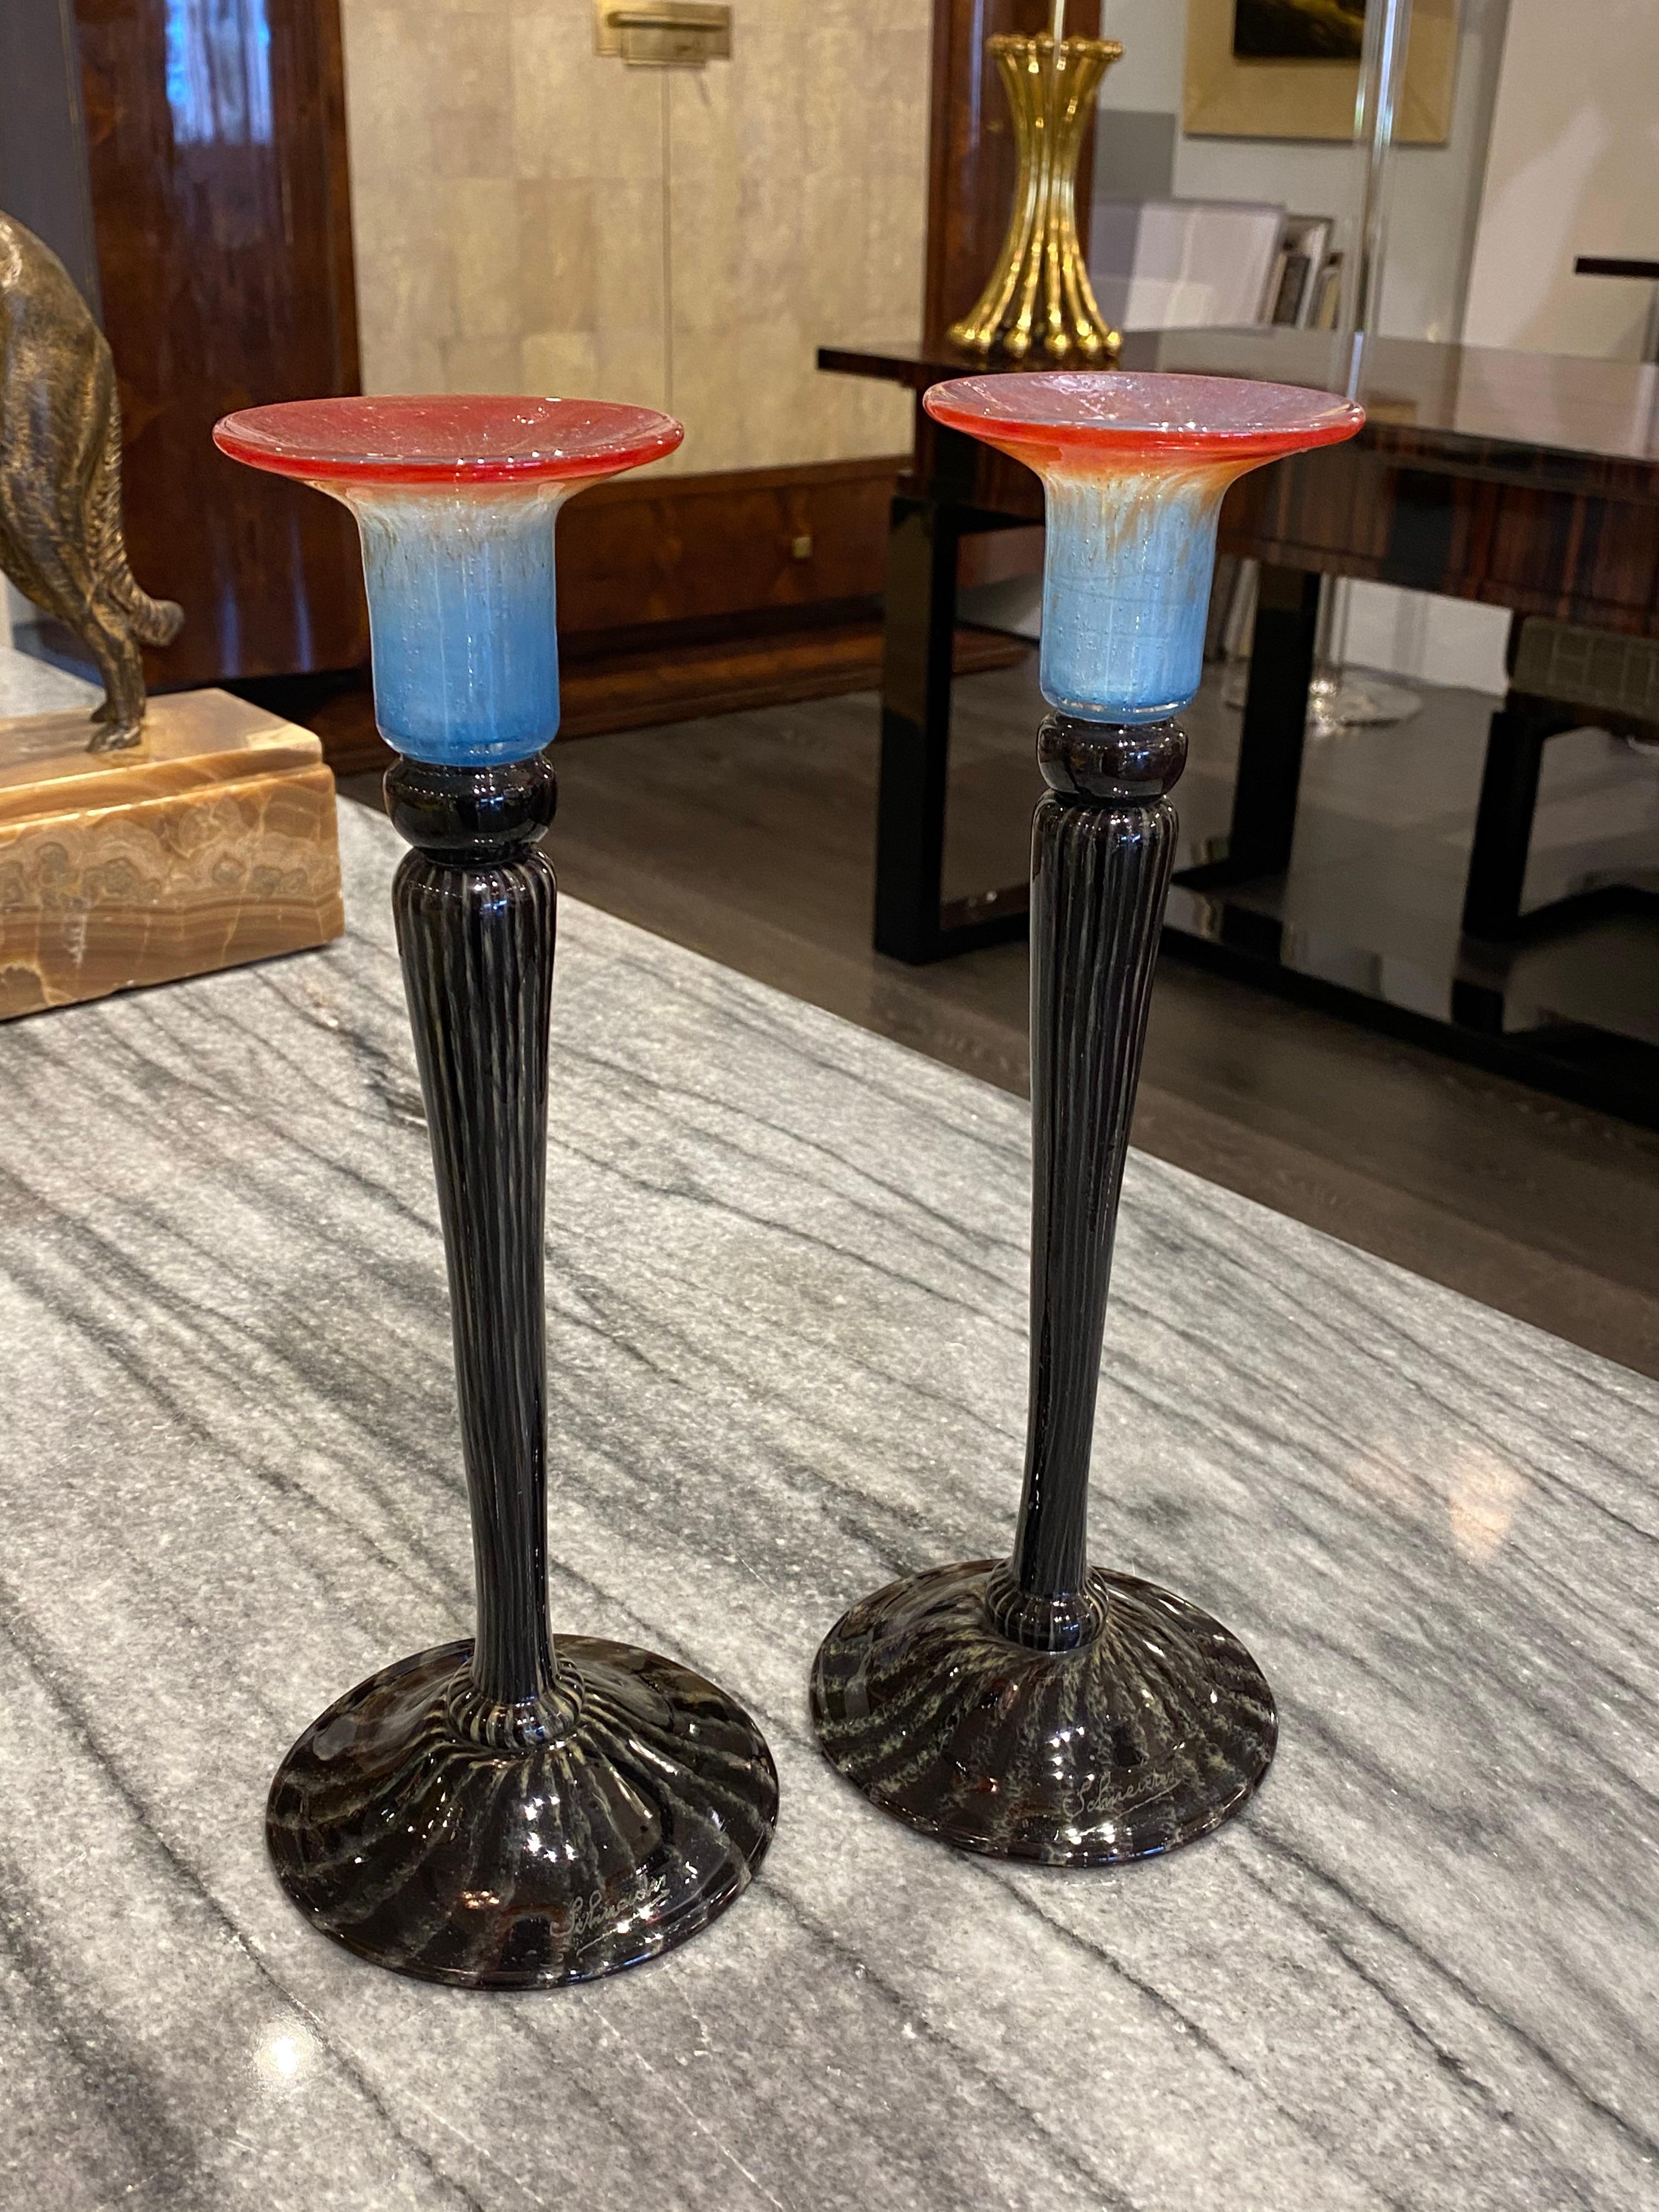 Pair of Art Deco candlestick by Charles Schneider in colored red glass and light blue.
Made in France, circa 1921
Signature: Schneider.